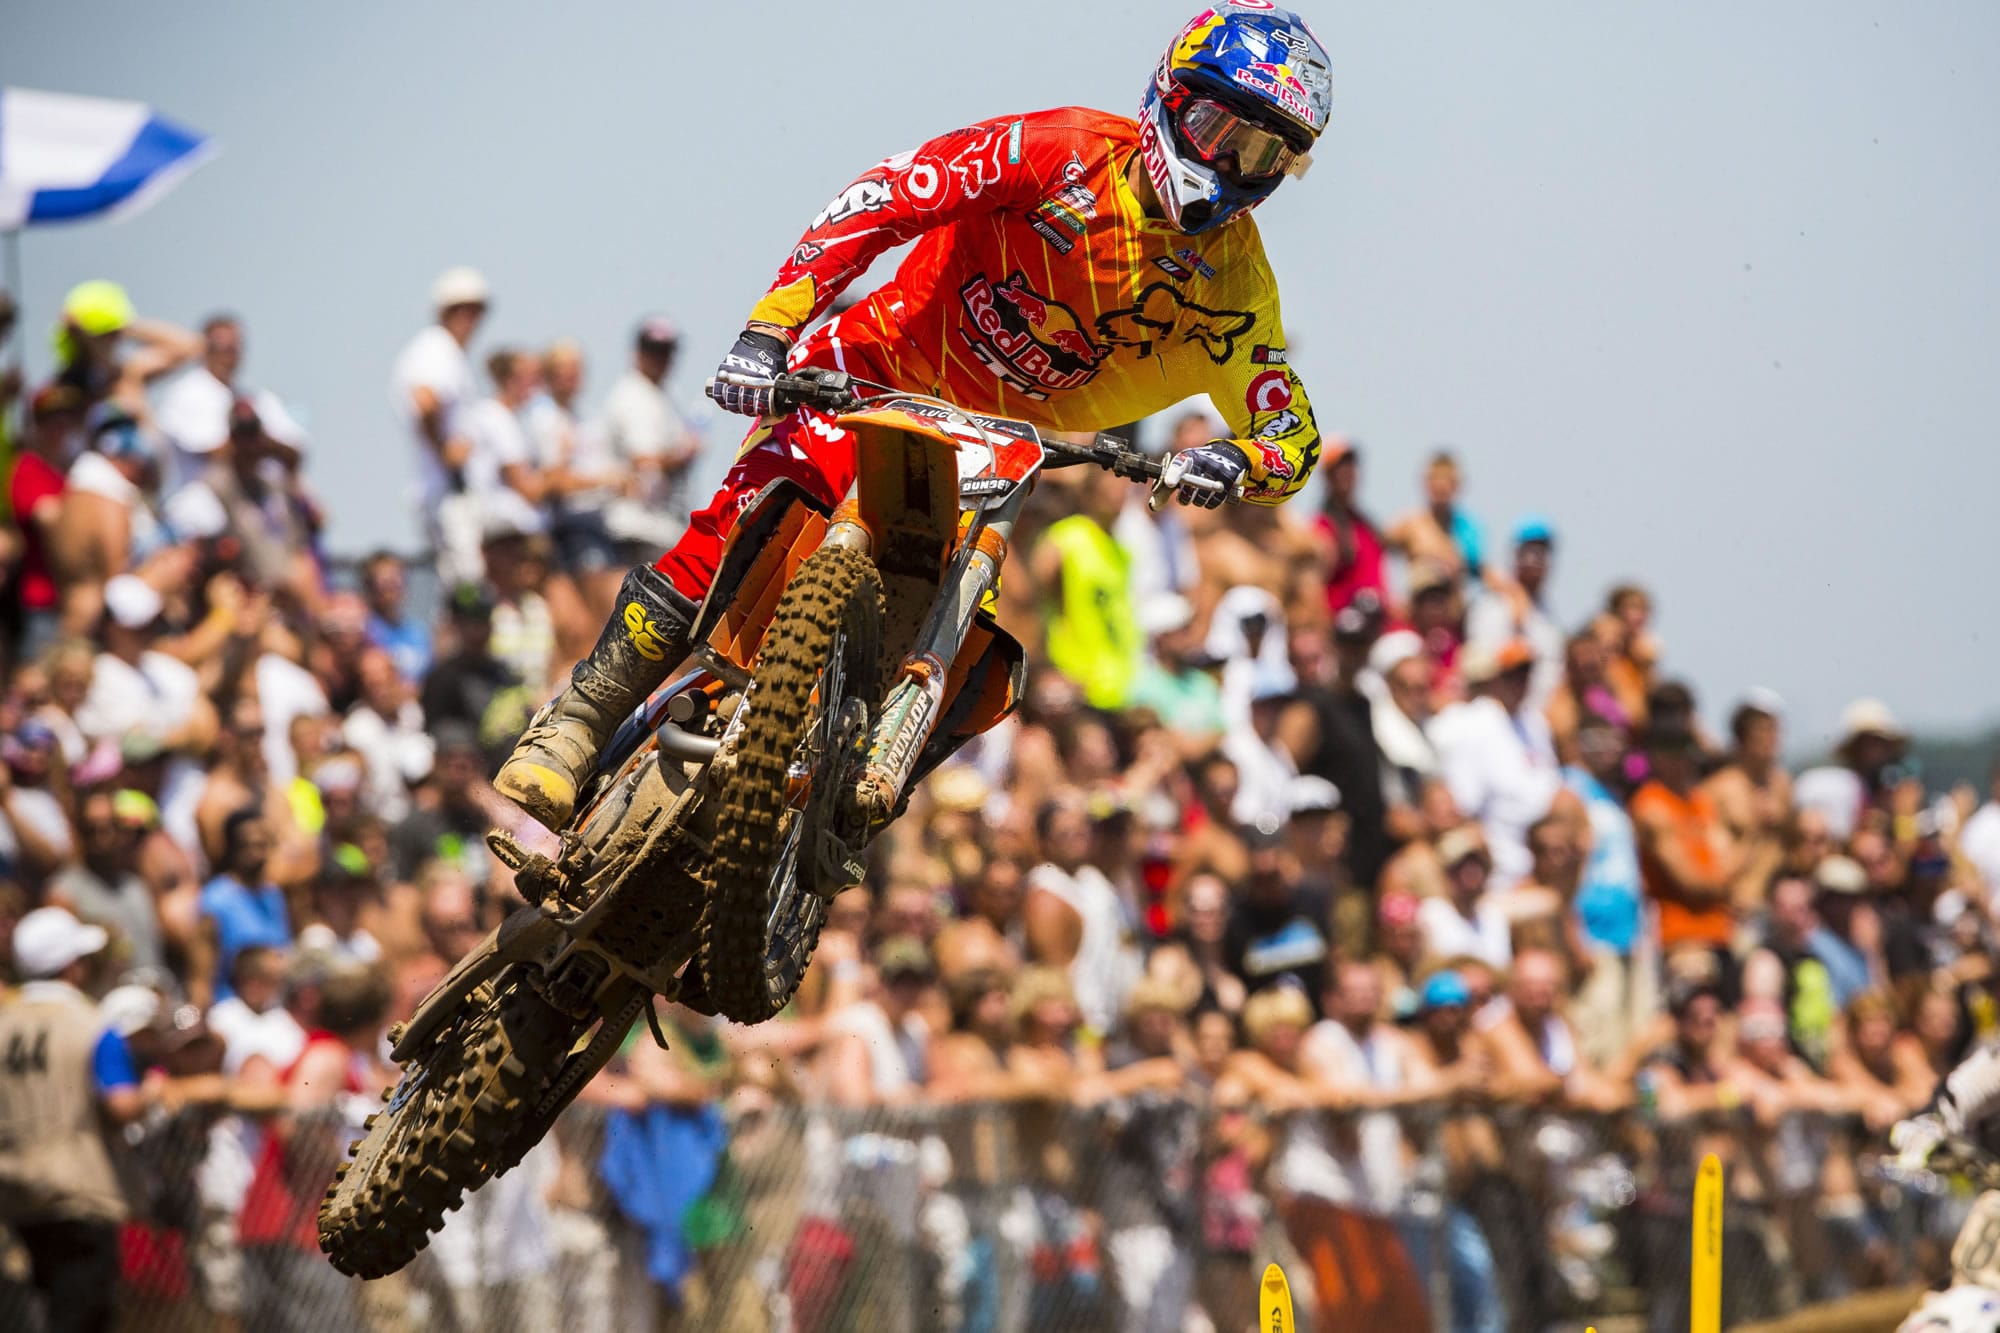 Ryan Dungey has won the last five AMA U.S. Motocross Championship series events with first-place finishes in all 10 motos.